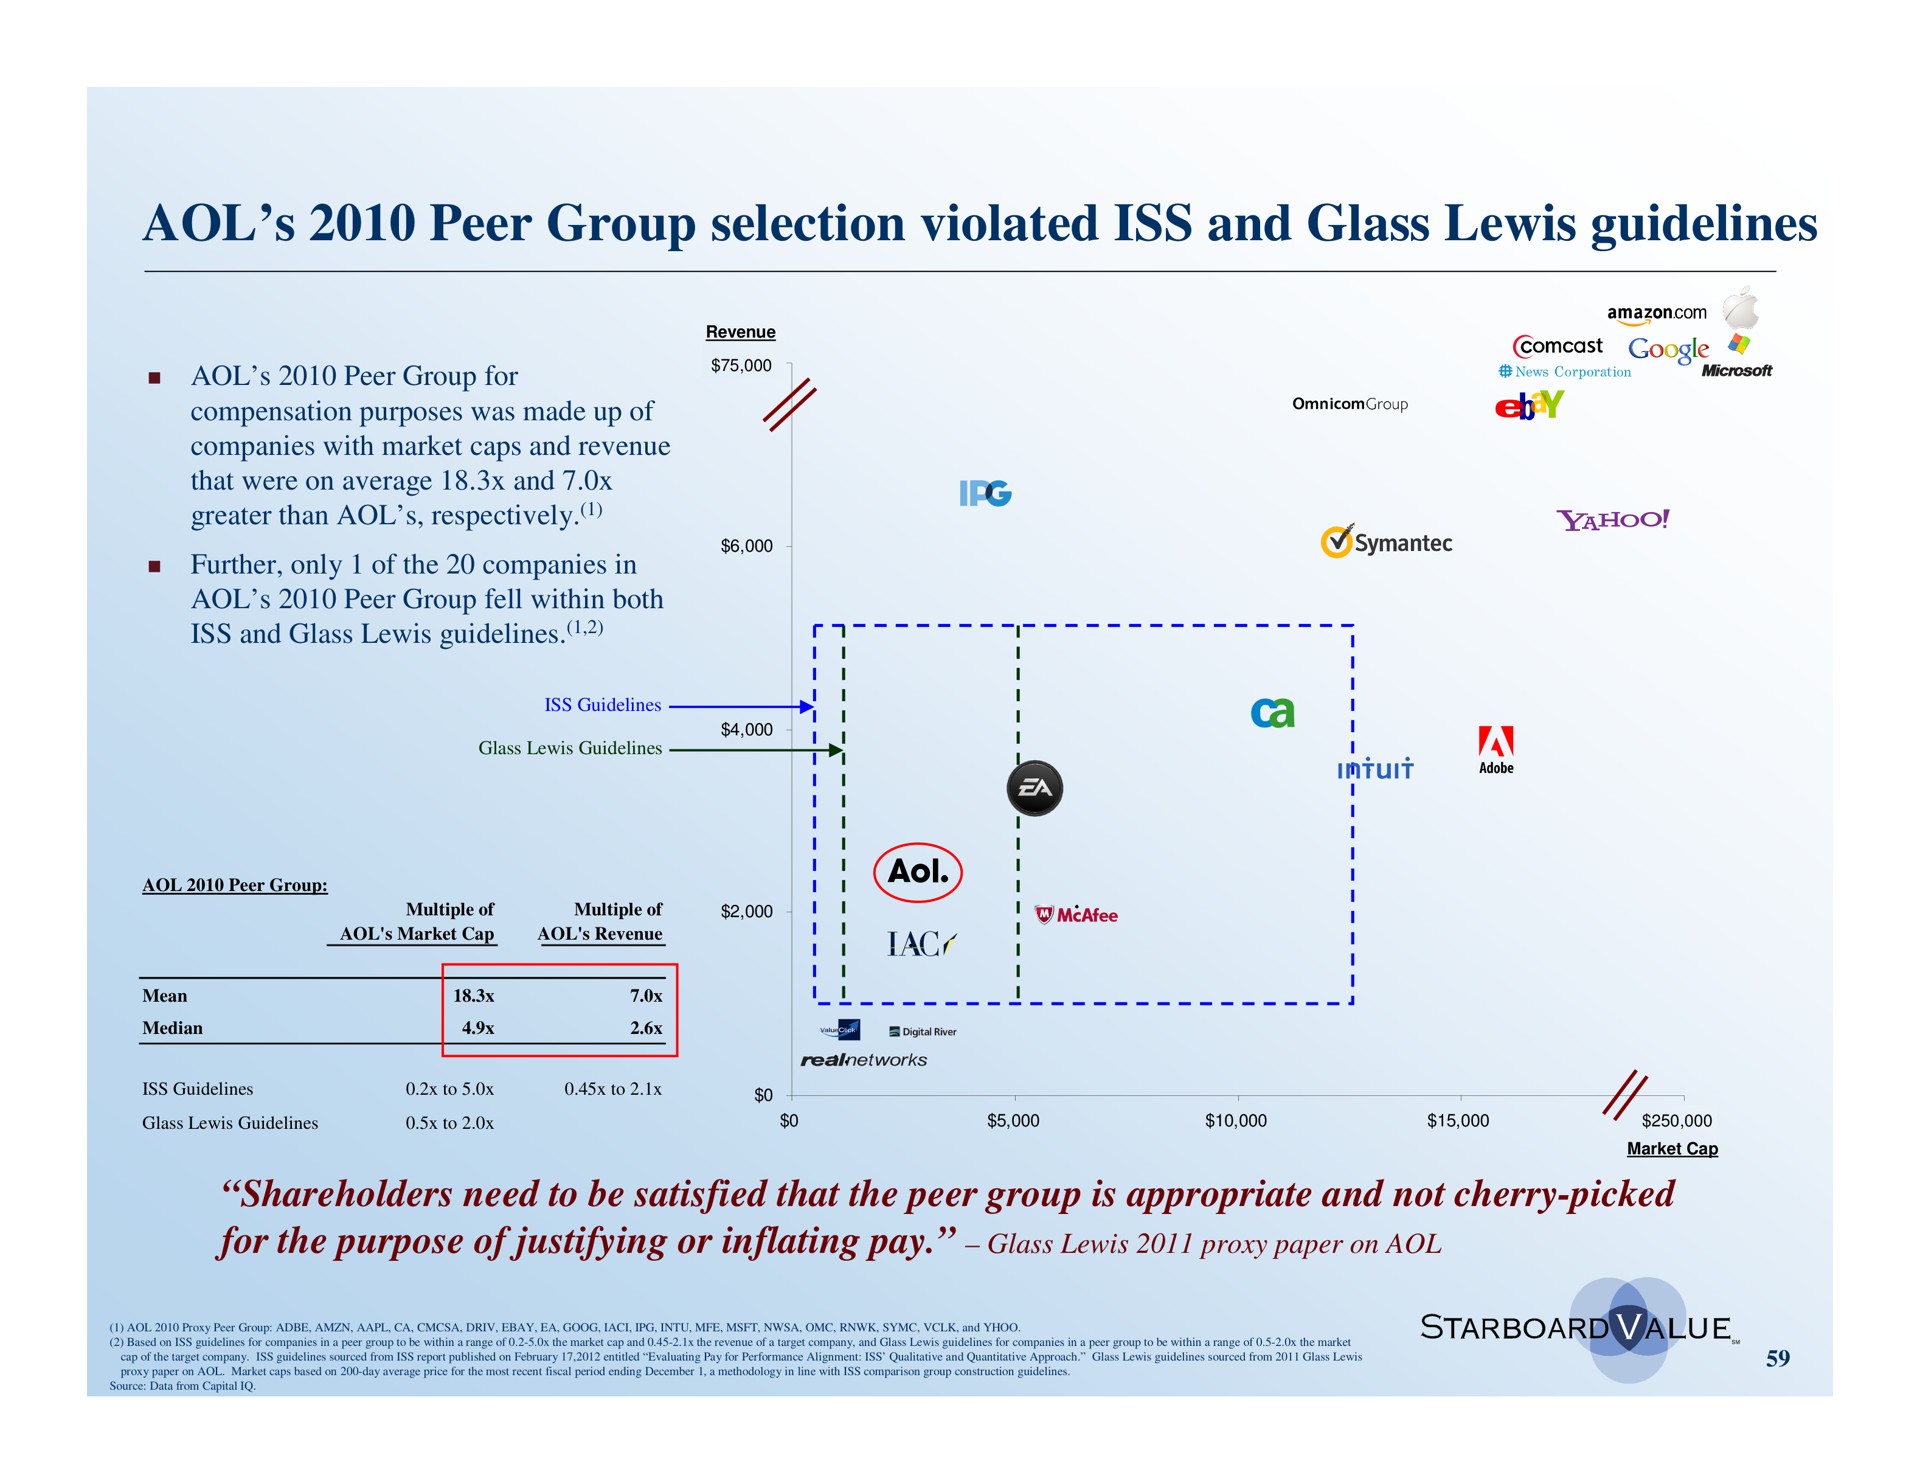 peer group selection violated iss and glass lewis guidelines | Starboard Value